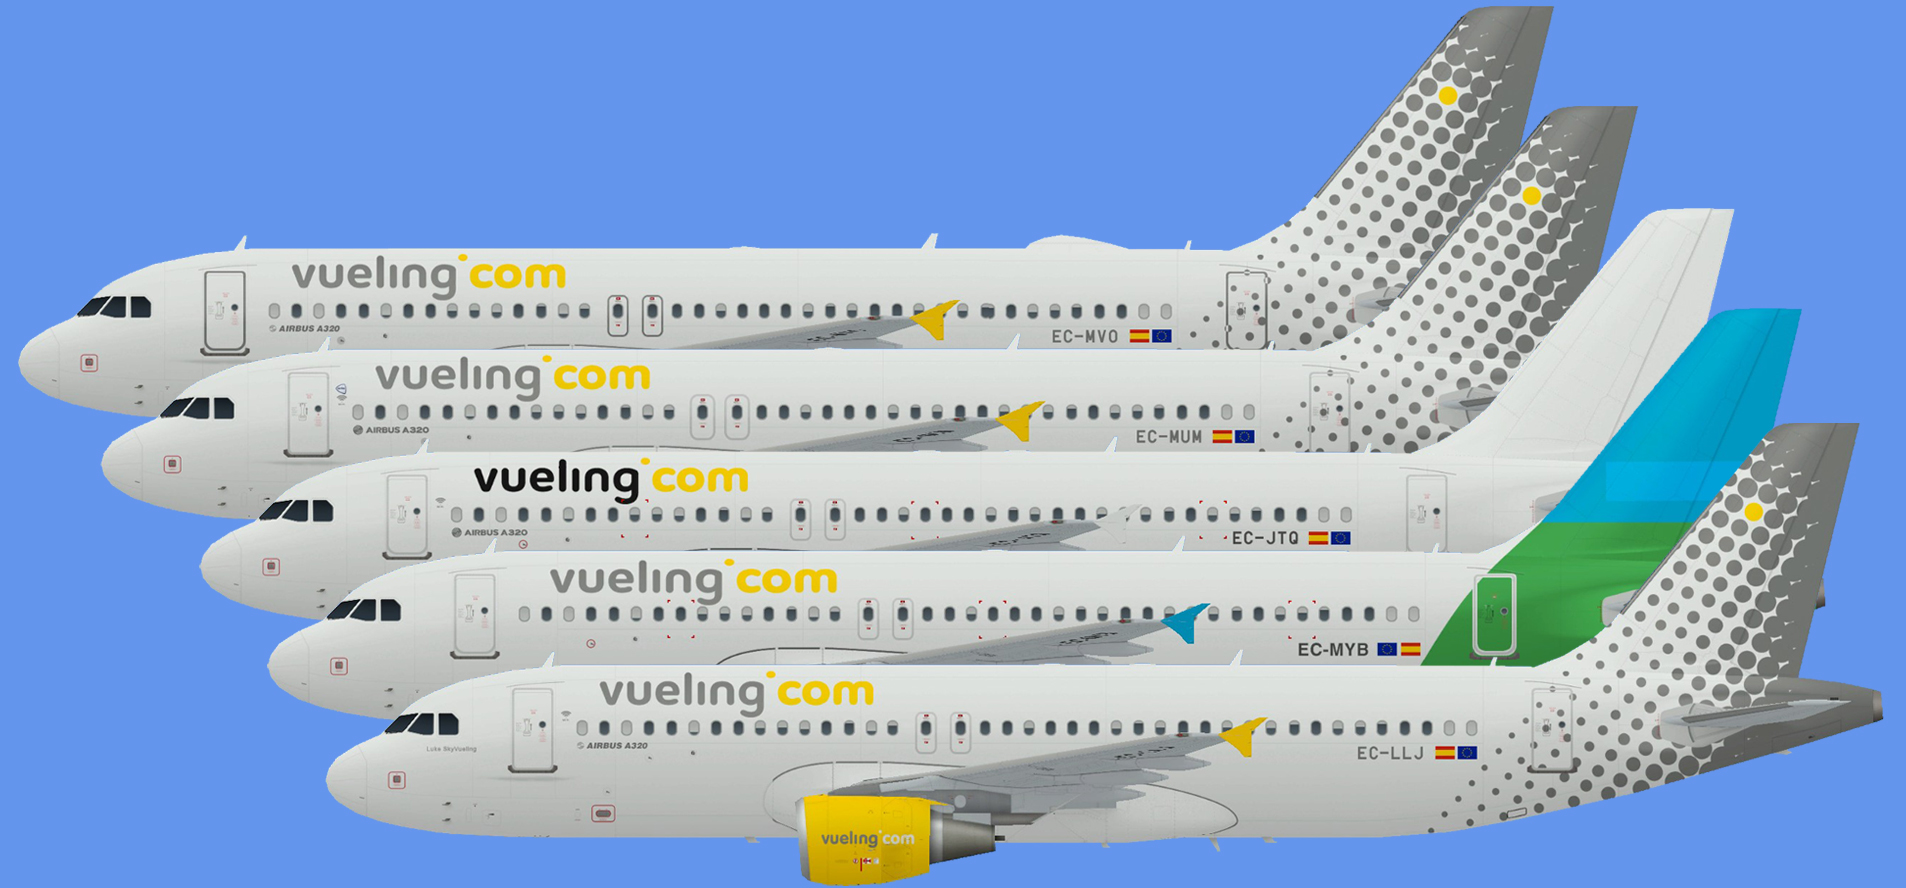 Vueling Airbus A320 CFM